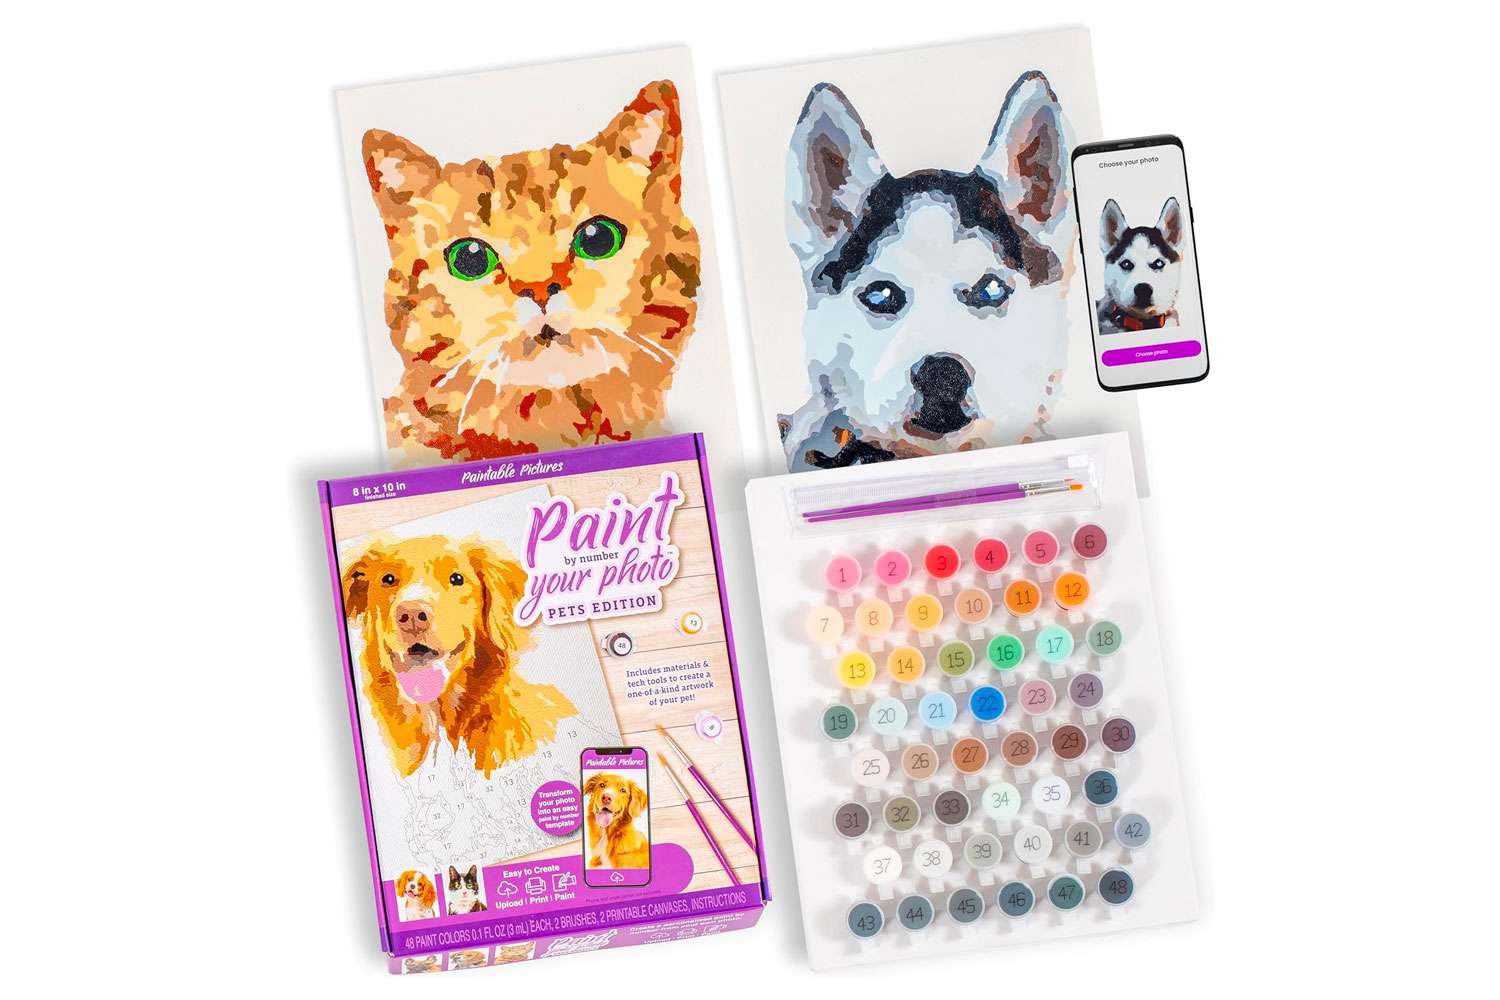 Amazon Paintable Pictures Paint Your Photo by Number: Pets Edition